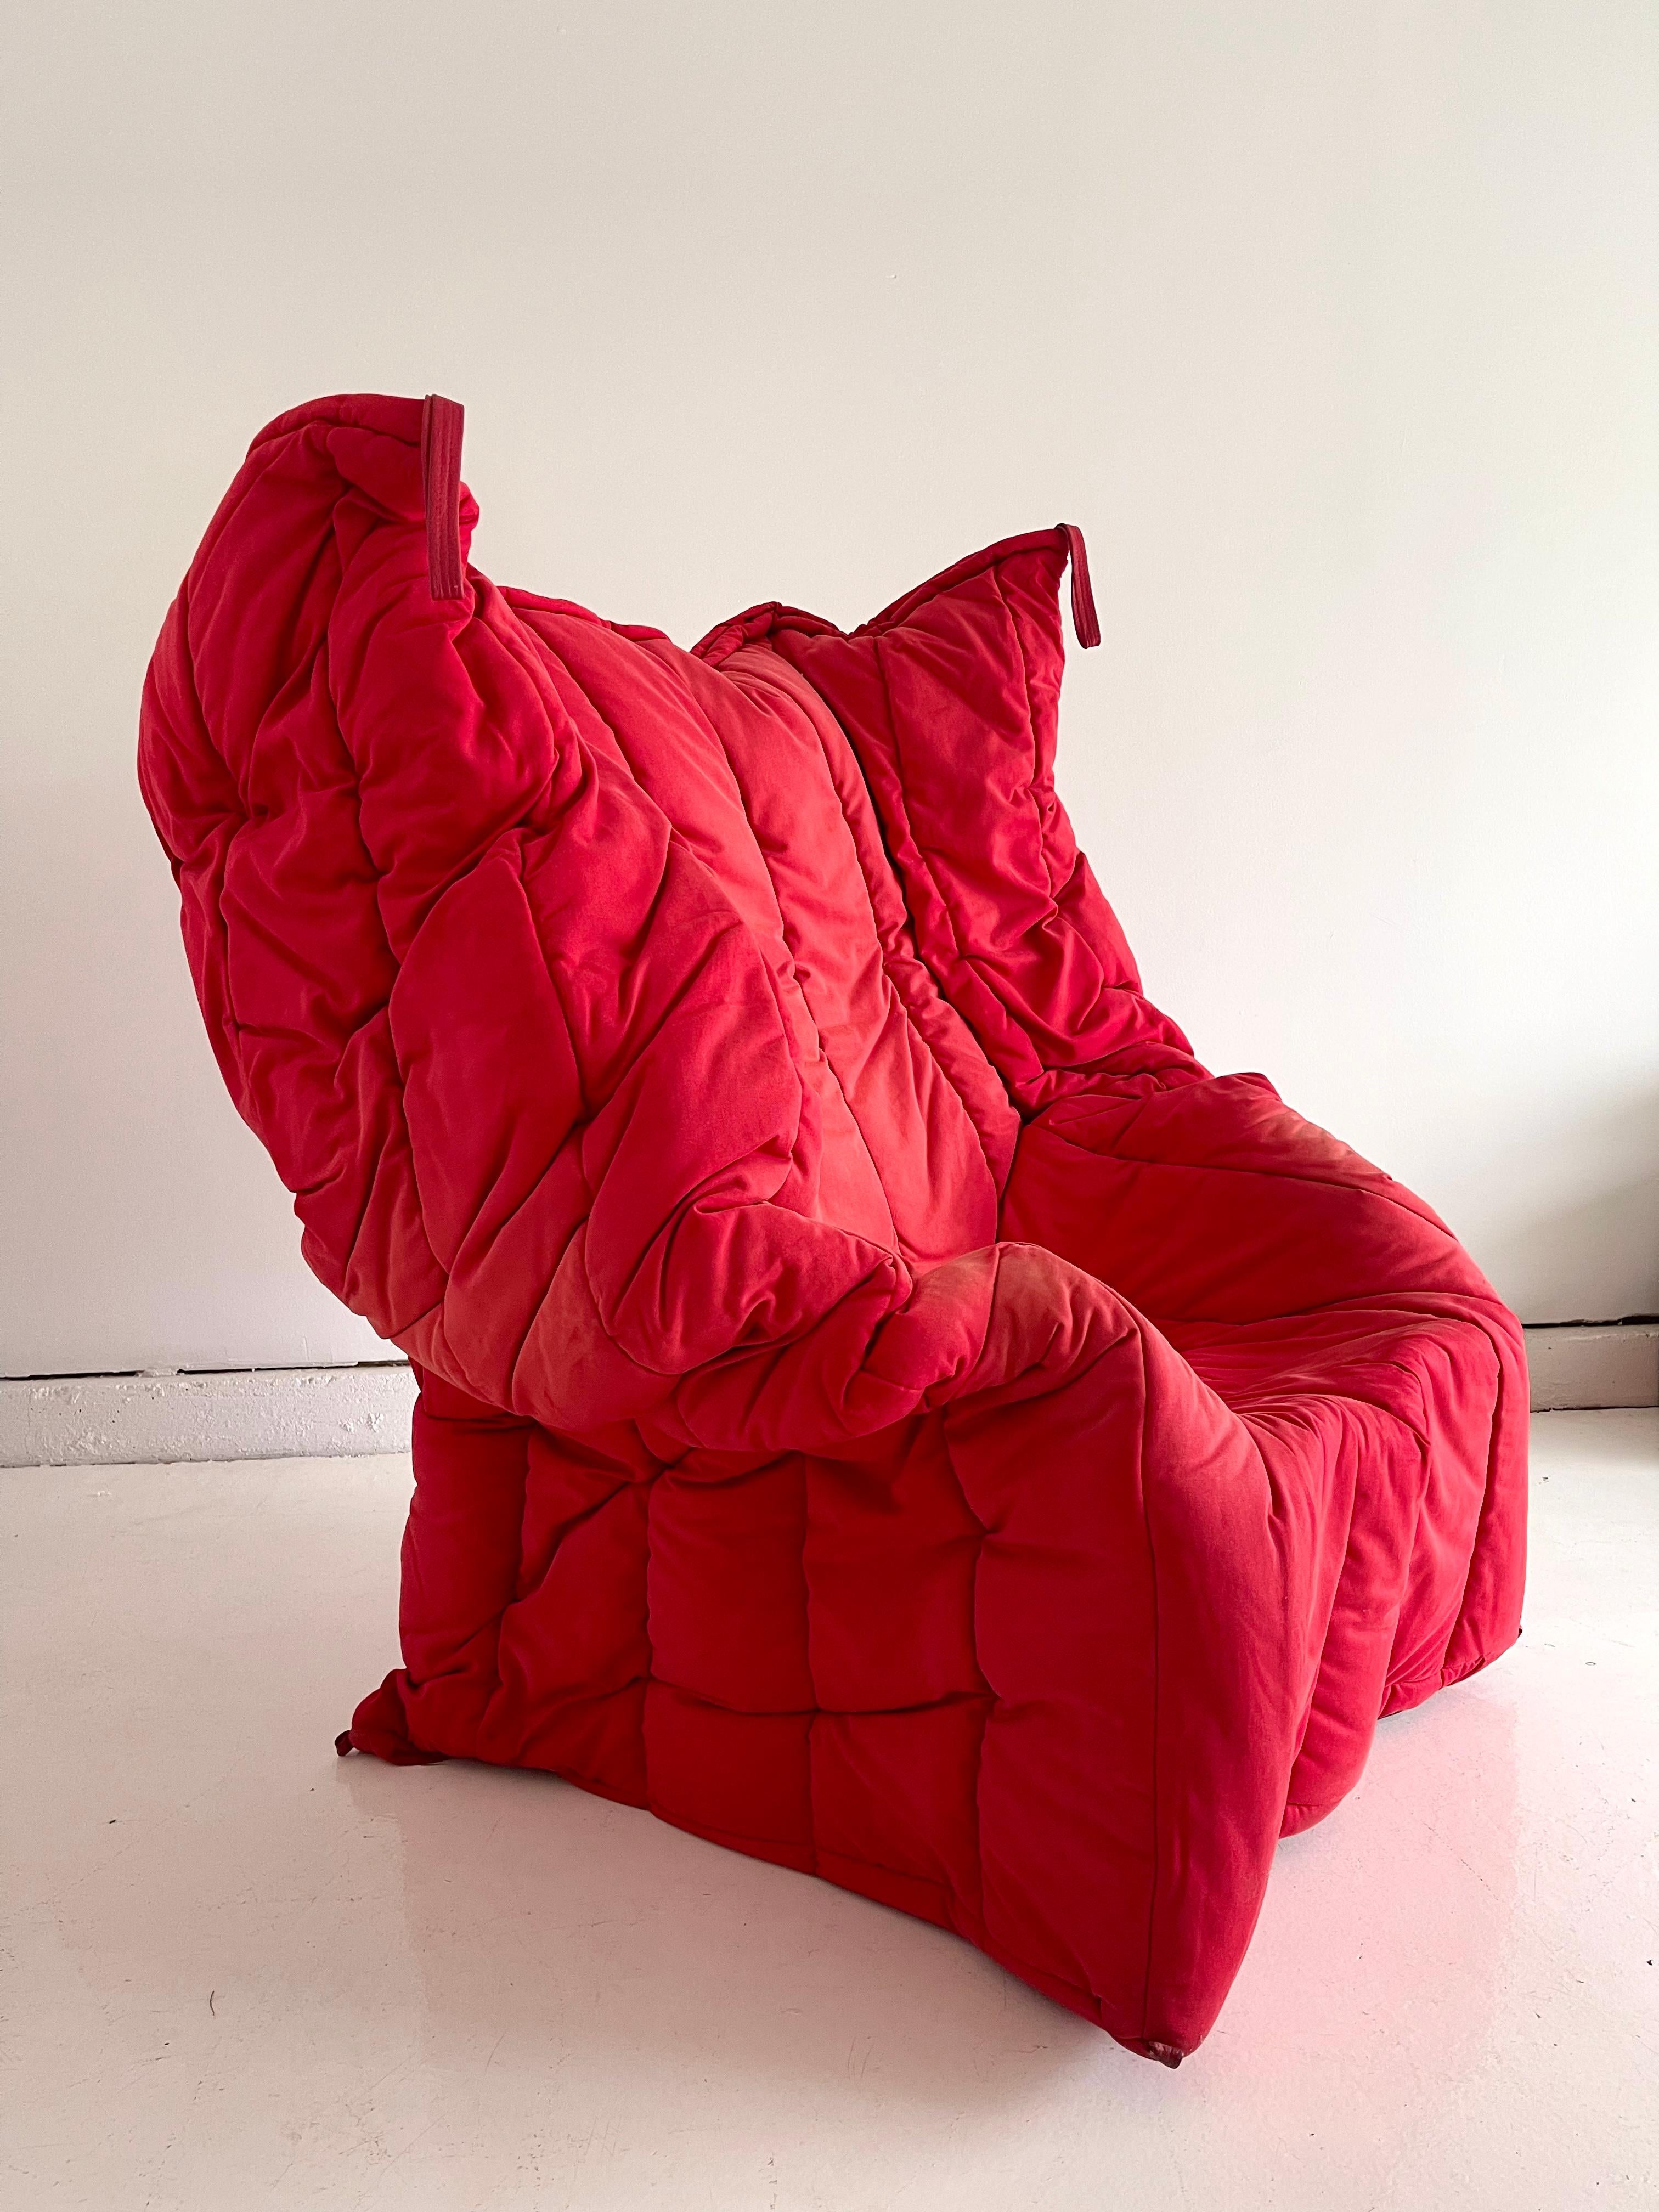 Exceptionally rare Gaetano Pesce Shadow chair for Meritalia. Formed by pouring polyurethane resin into the specially designed fabric “bag” the resin hardens around the negative space of a person sitting creating a surprisingly comfortable seat. Due